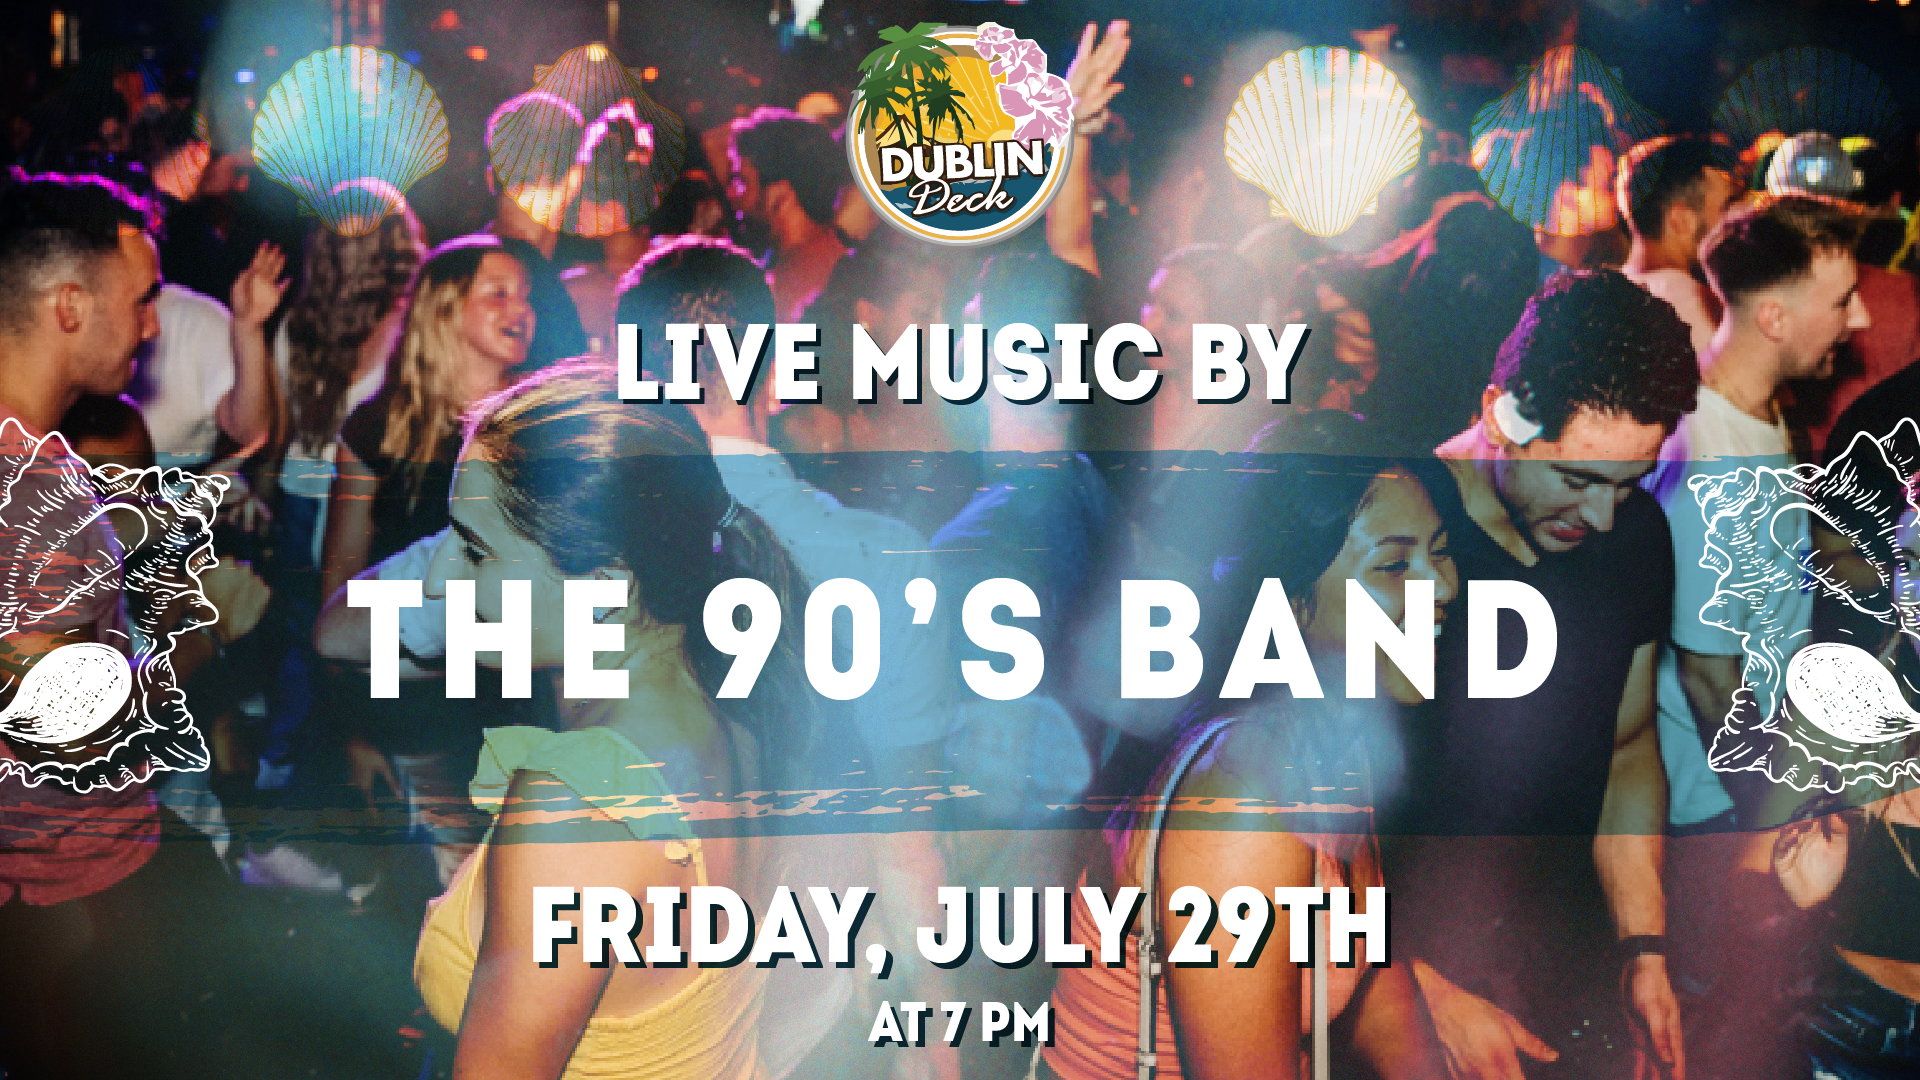 Jam out with The 90's Band! Music begins at 7PM